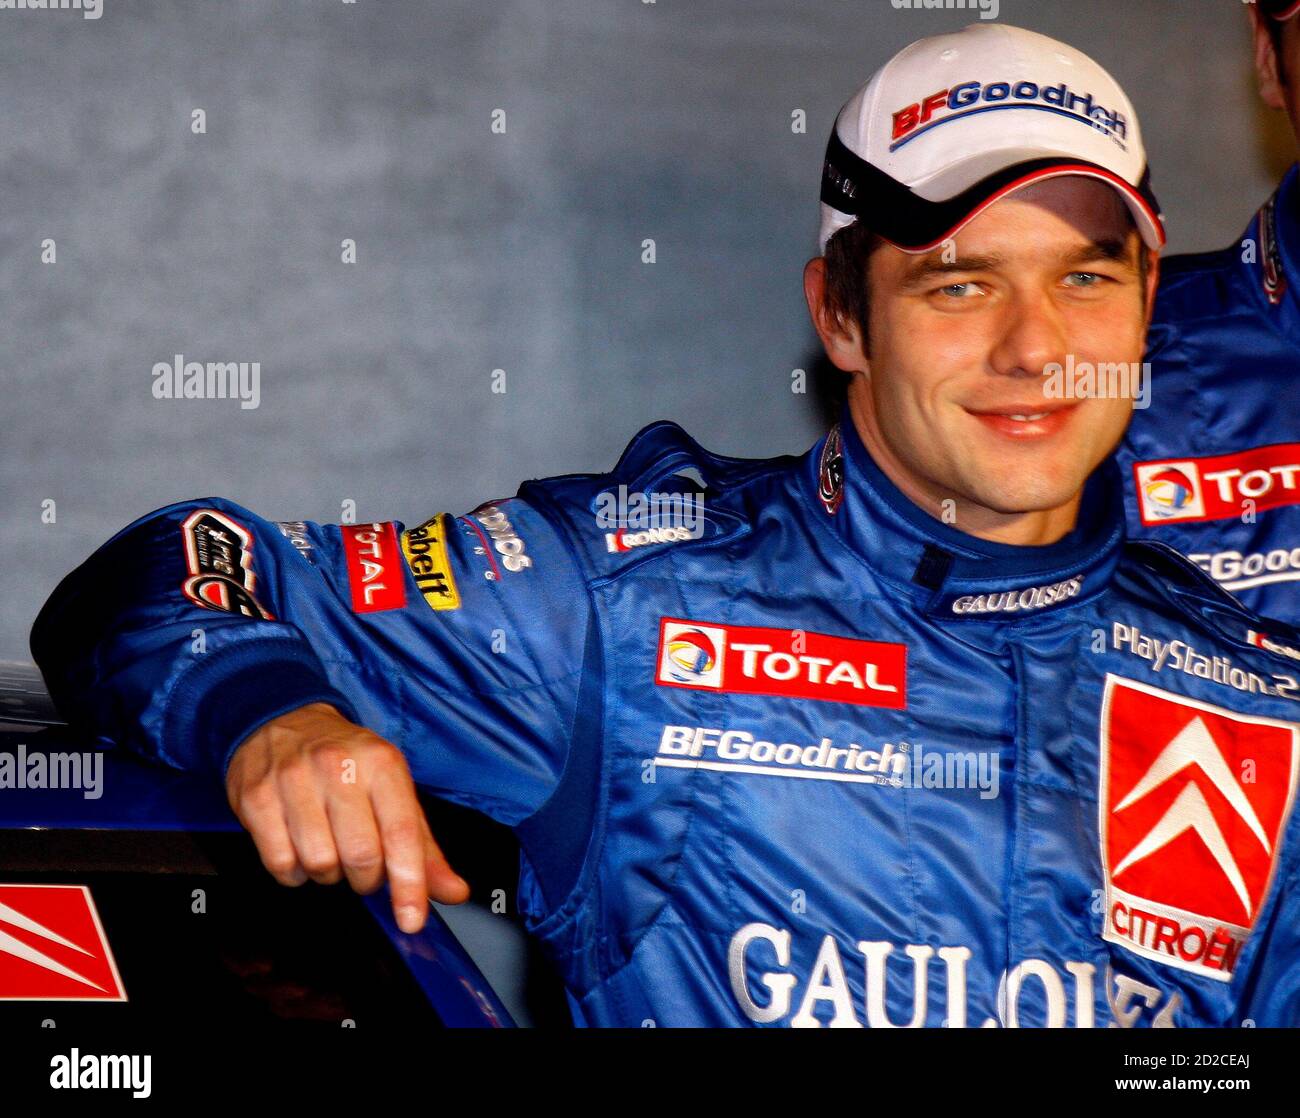 2005 rally world champion Sebastien Loeb of France poses during the  official showing of his Citroen Xsara WRC in Monte Carlo January 18, 2006.  Loeb will take part in the Monte Carlo